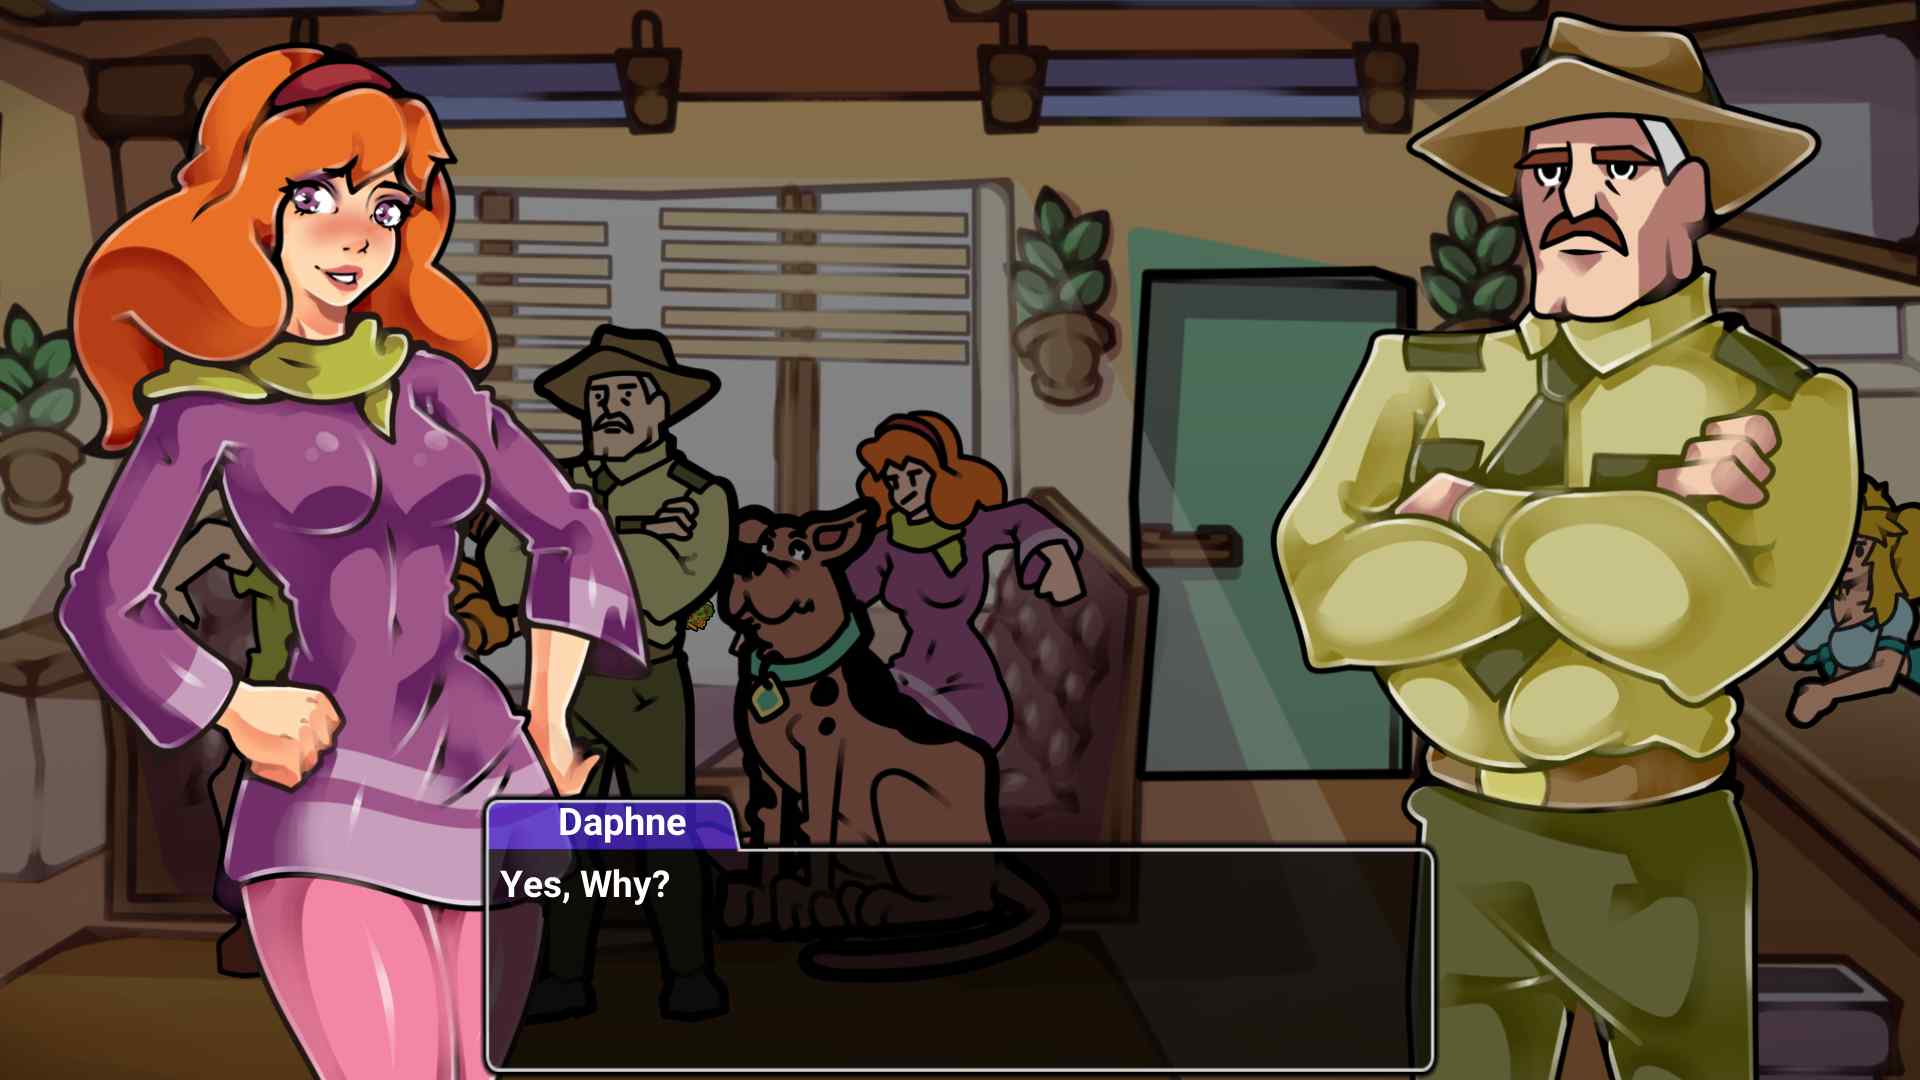 Scooby-Doo! A Depraved Investigation